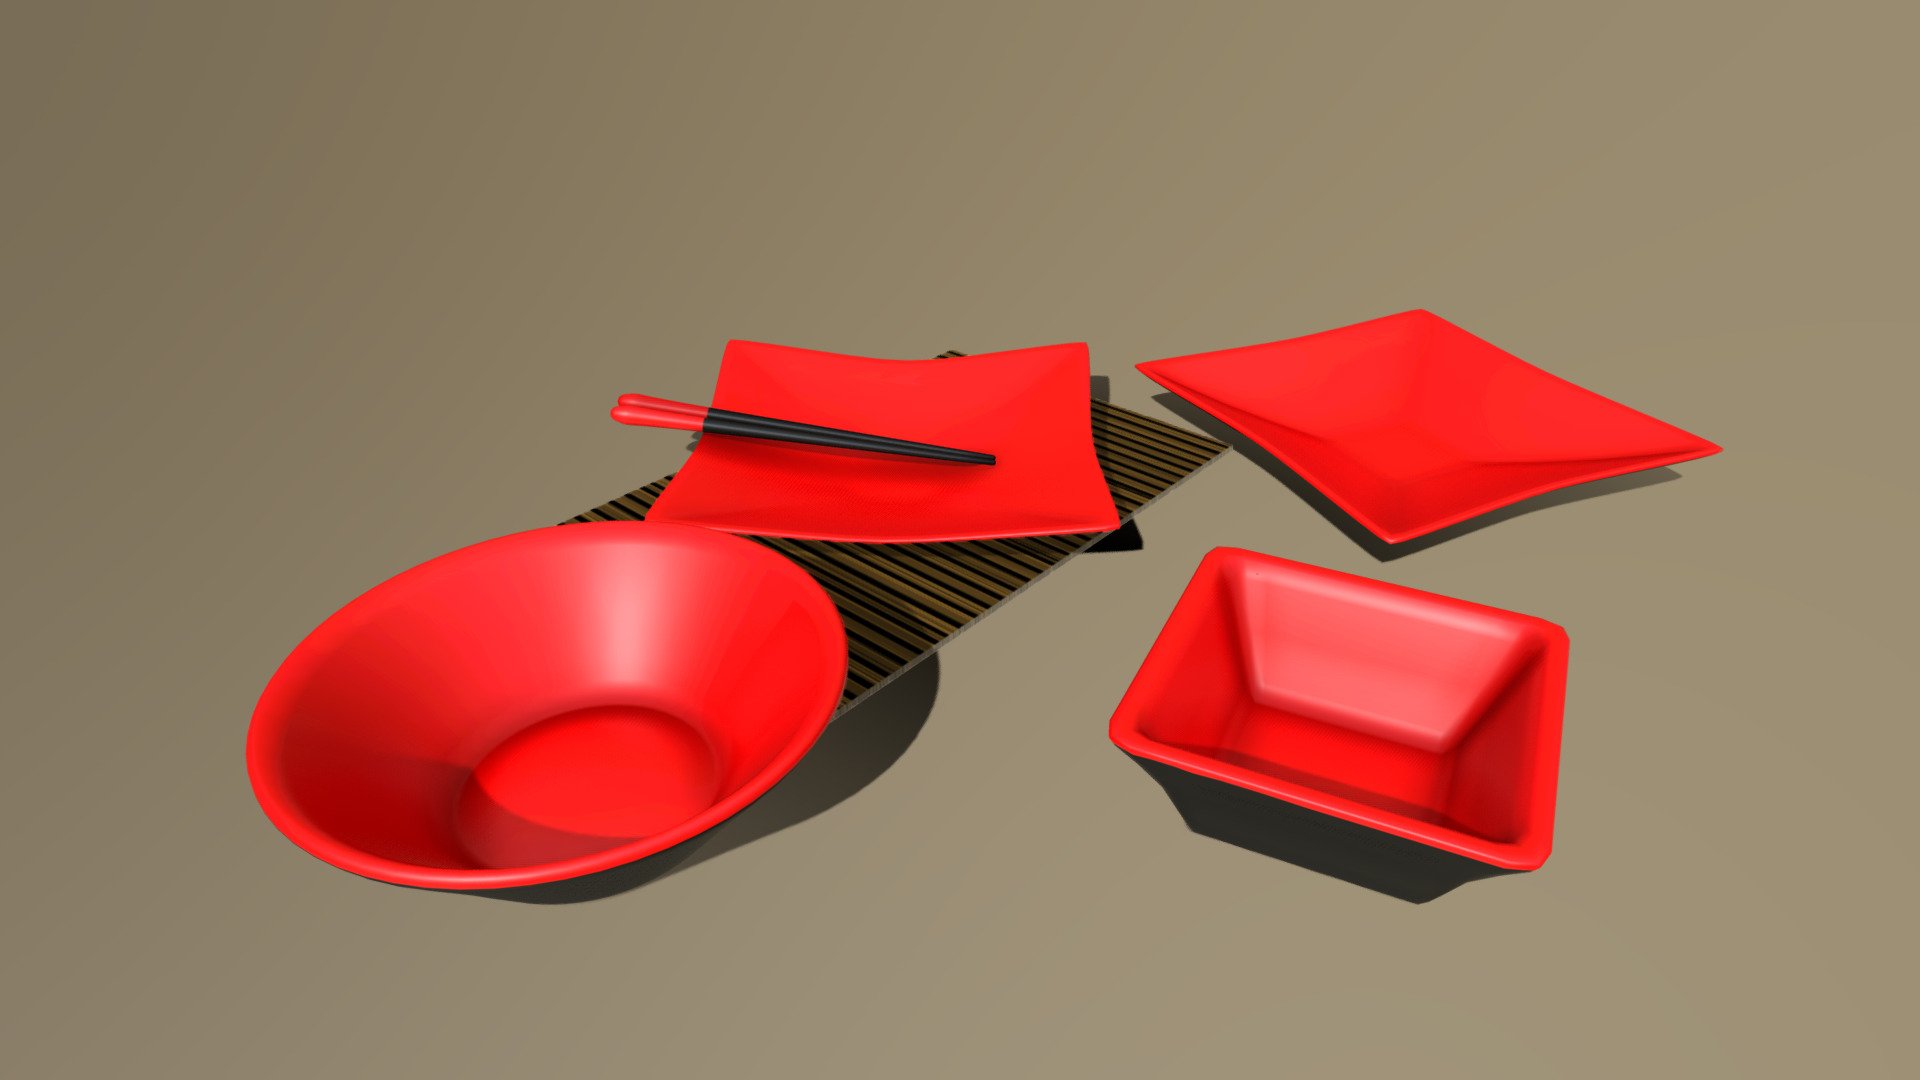 Some basic scene fillers inspired by japanese cultures 3d model